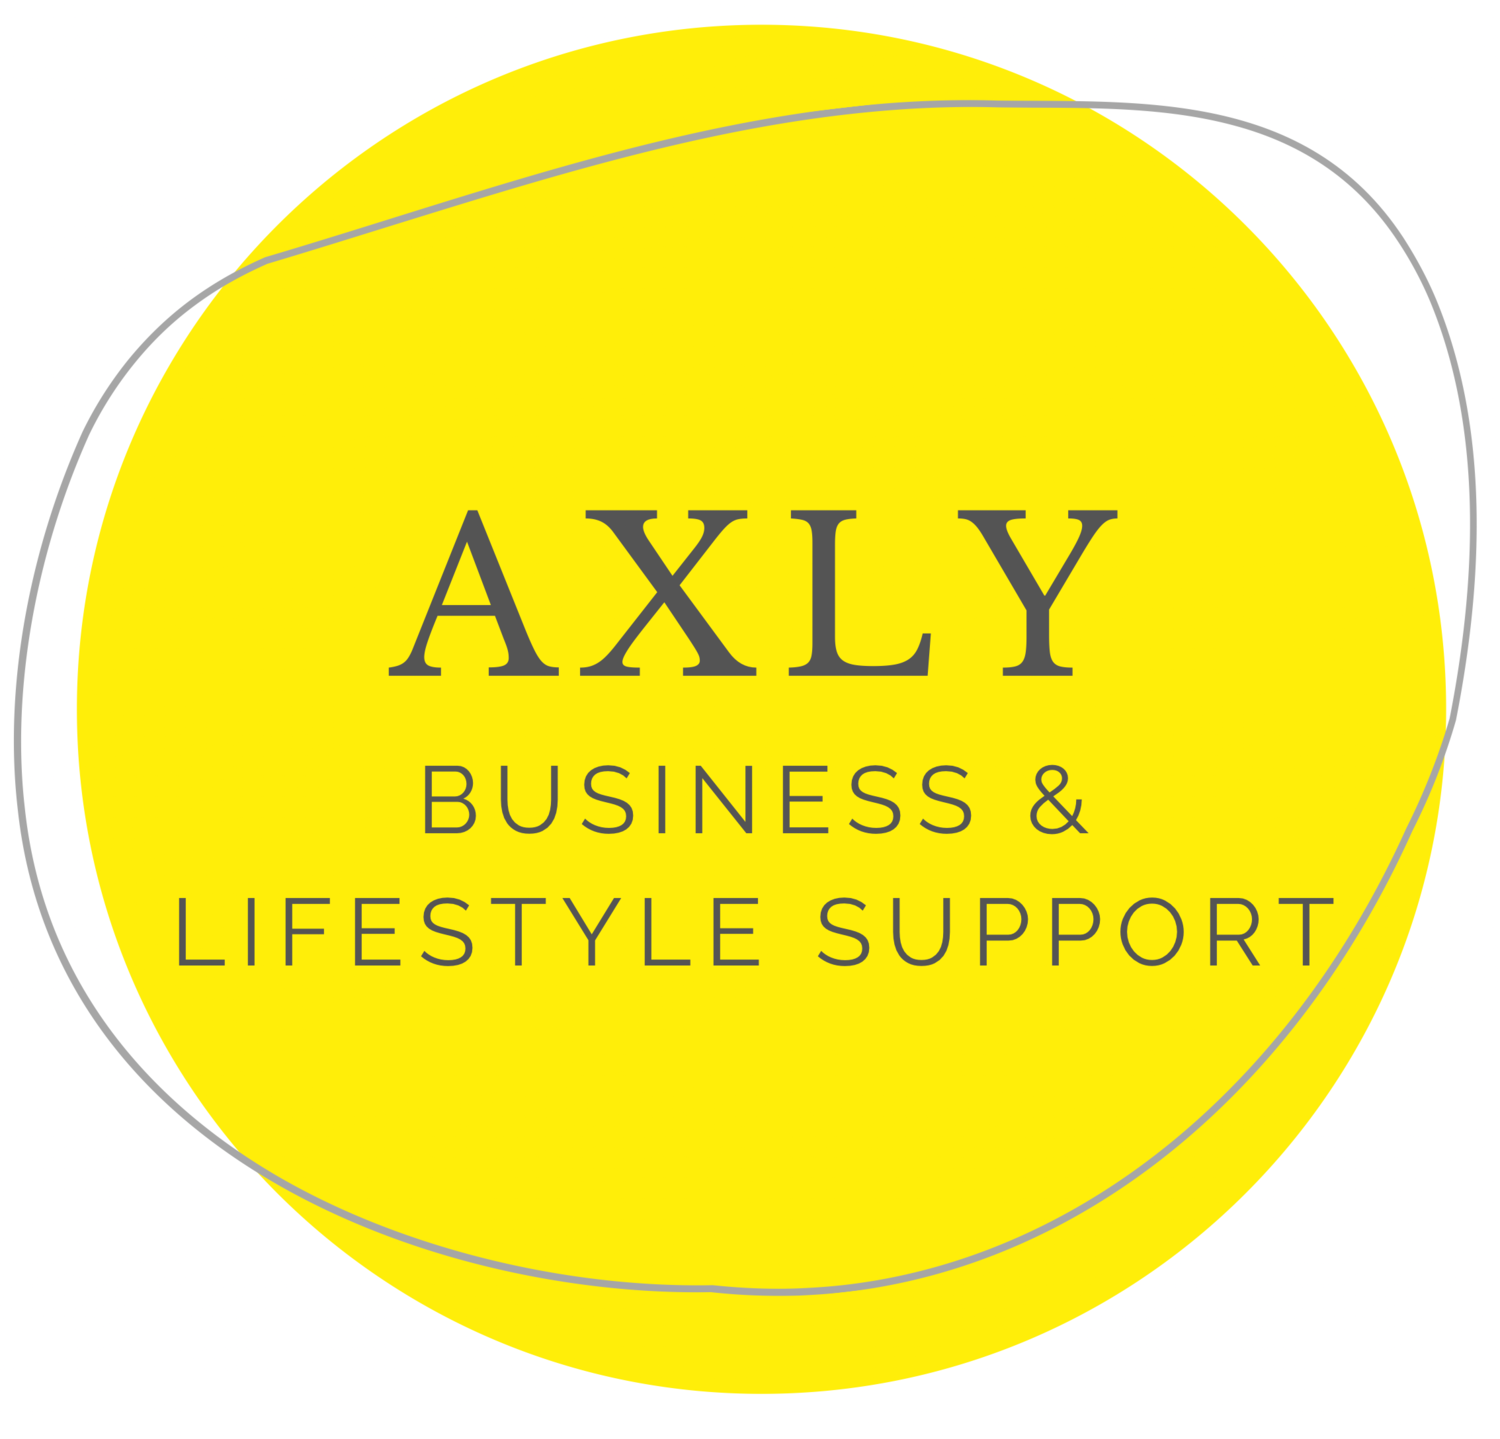 Axly Business and Lifestyle Support